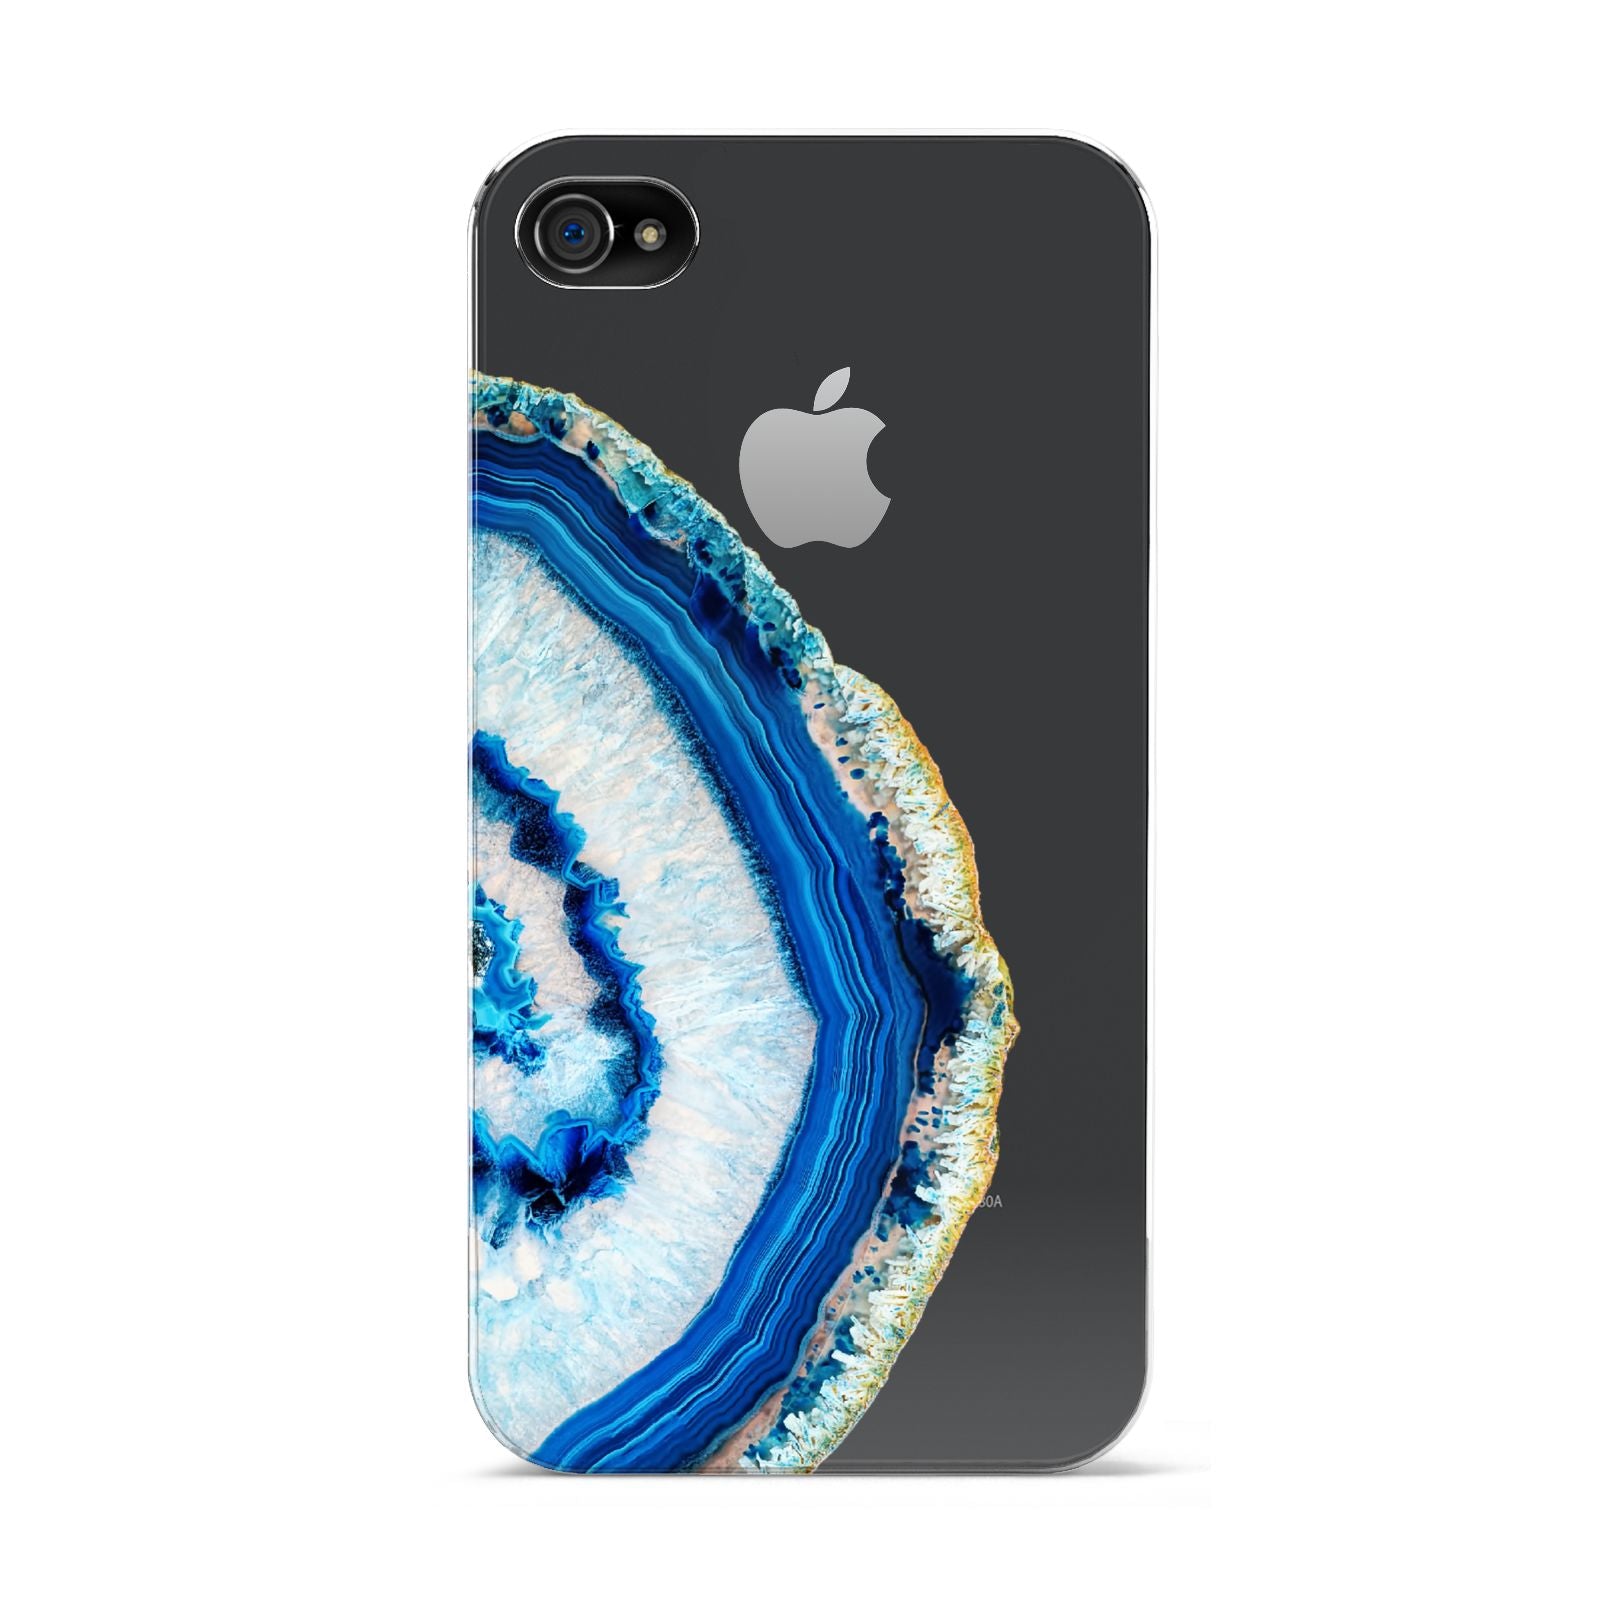 Agate Dark Blue and Turquoise Apple iPhone 4s Case